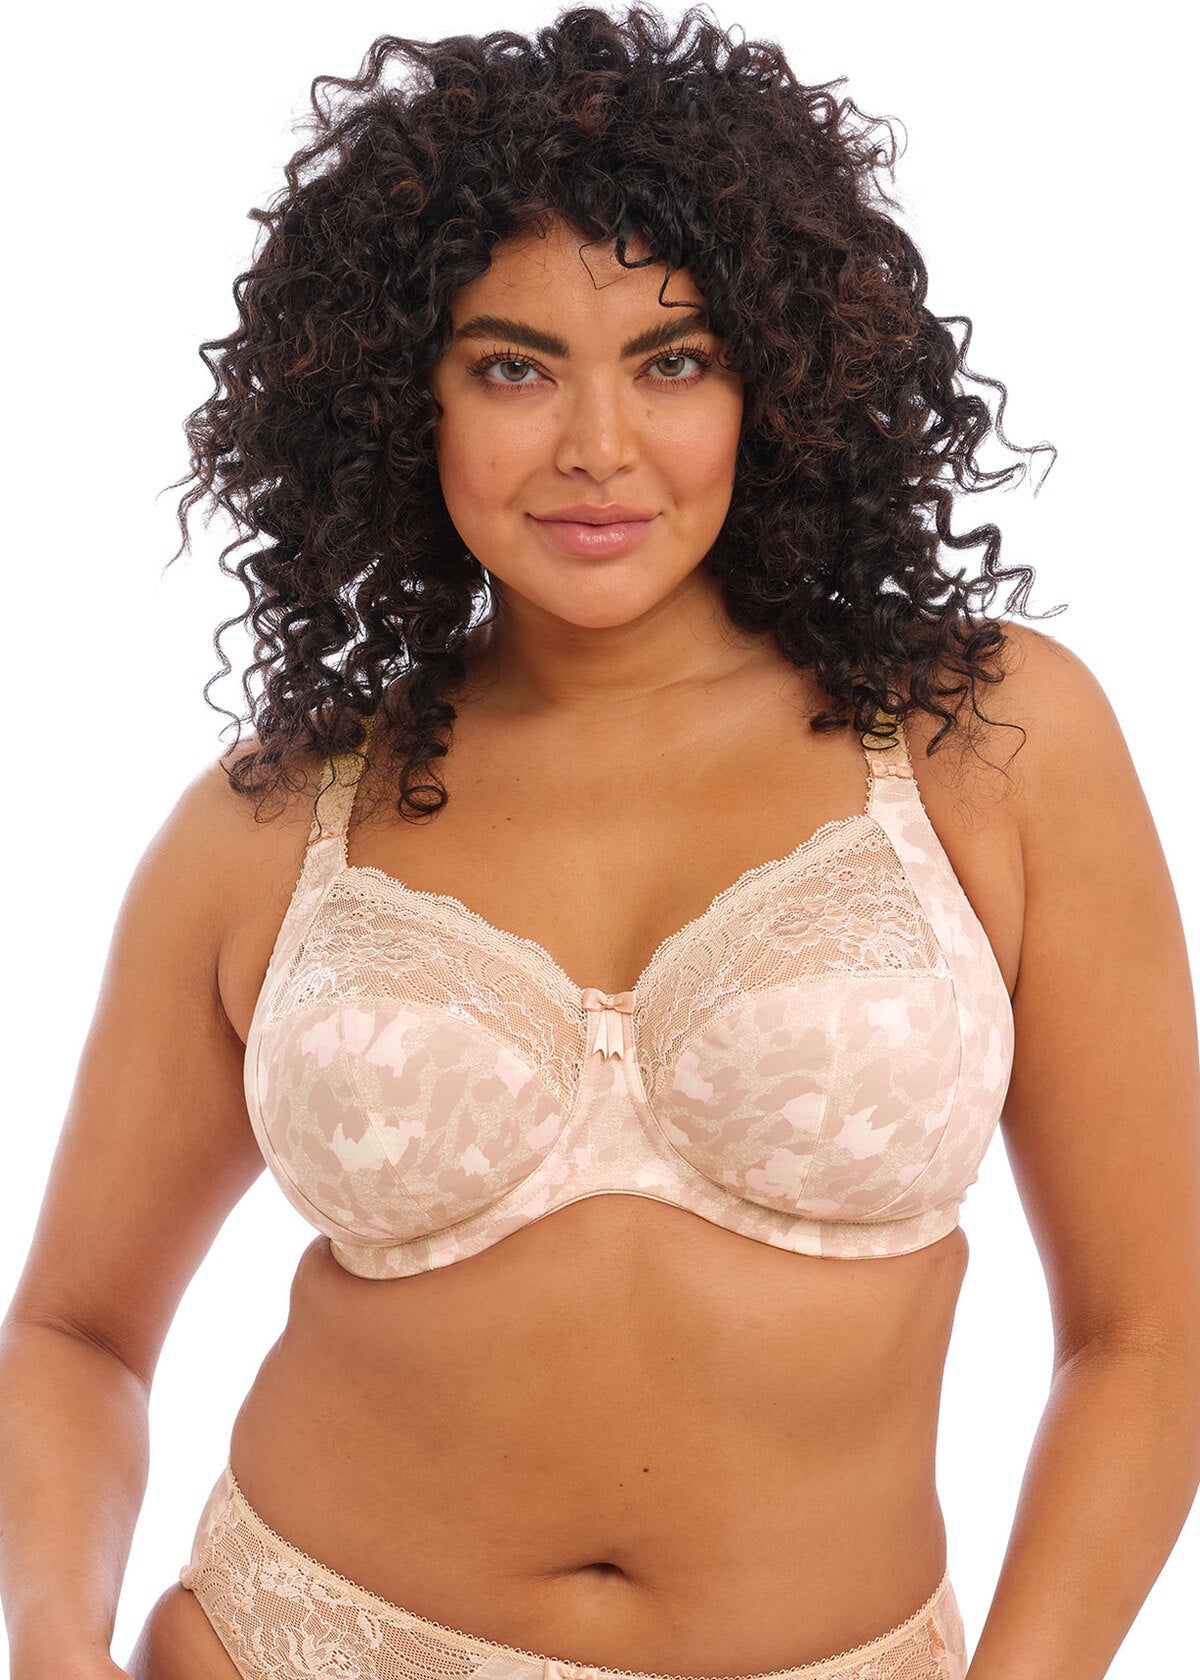 Morgan Stretch Banded Bra - Toasted Almond, worn by model front view